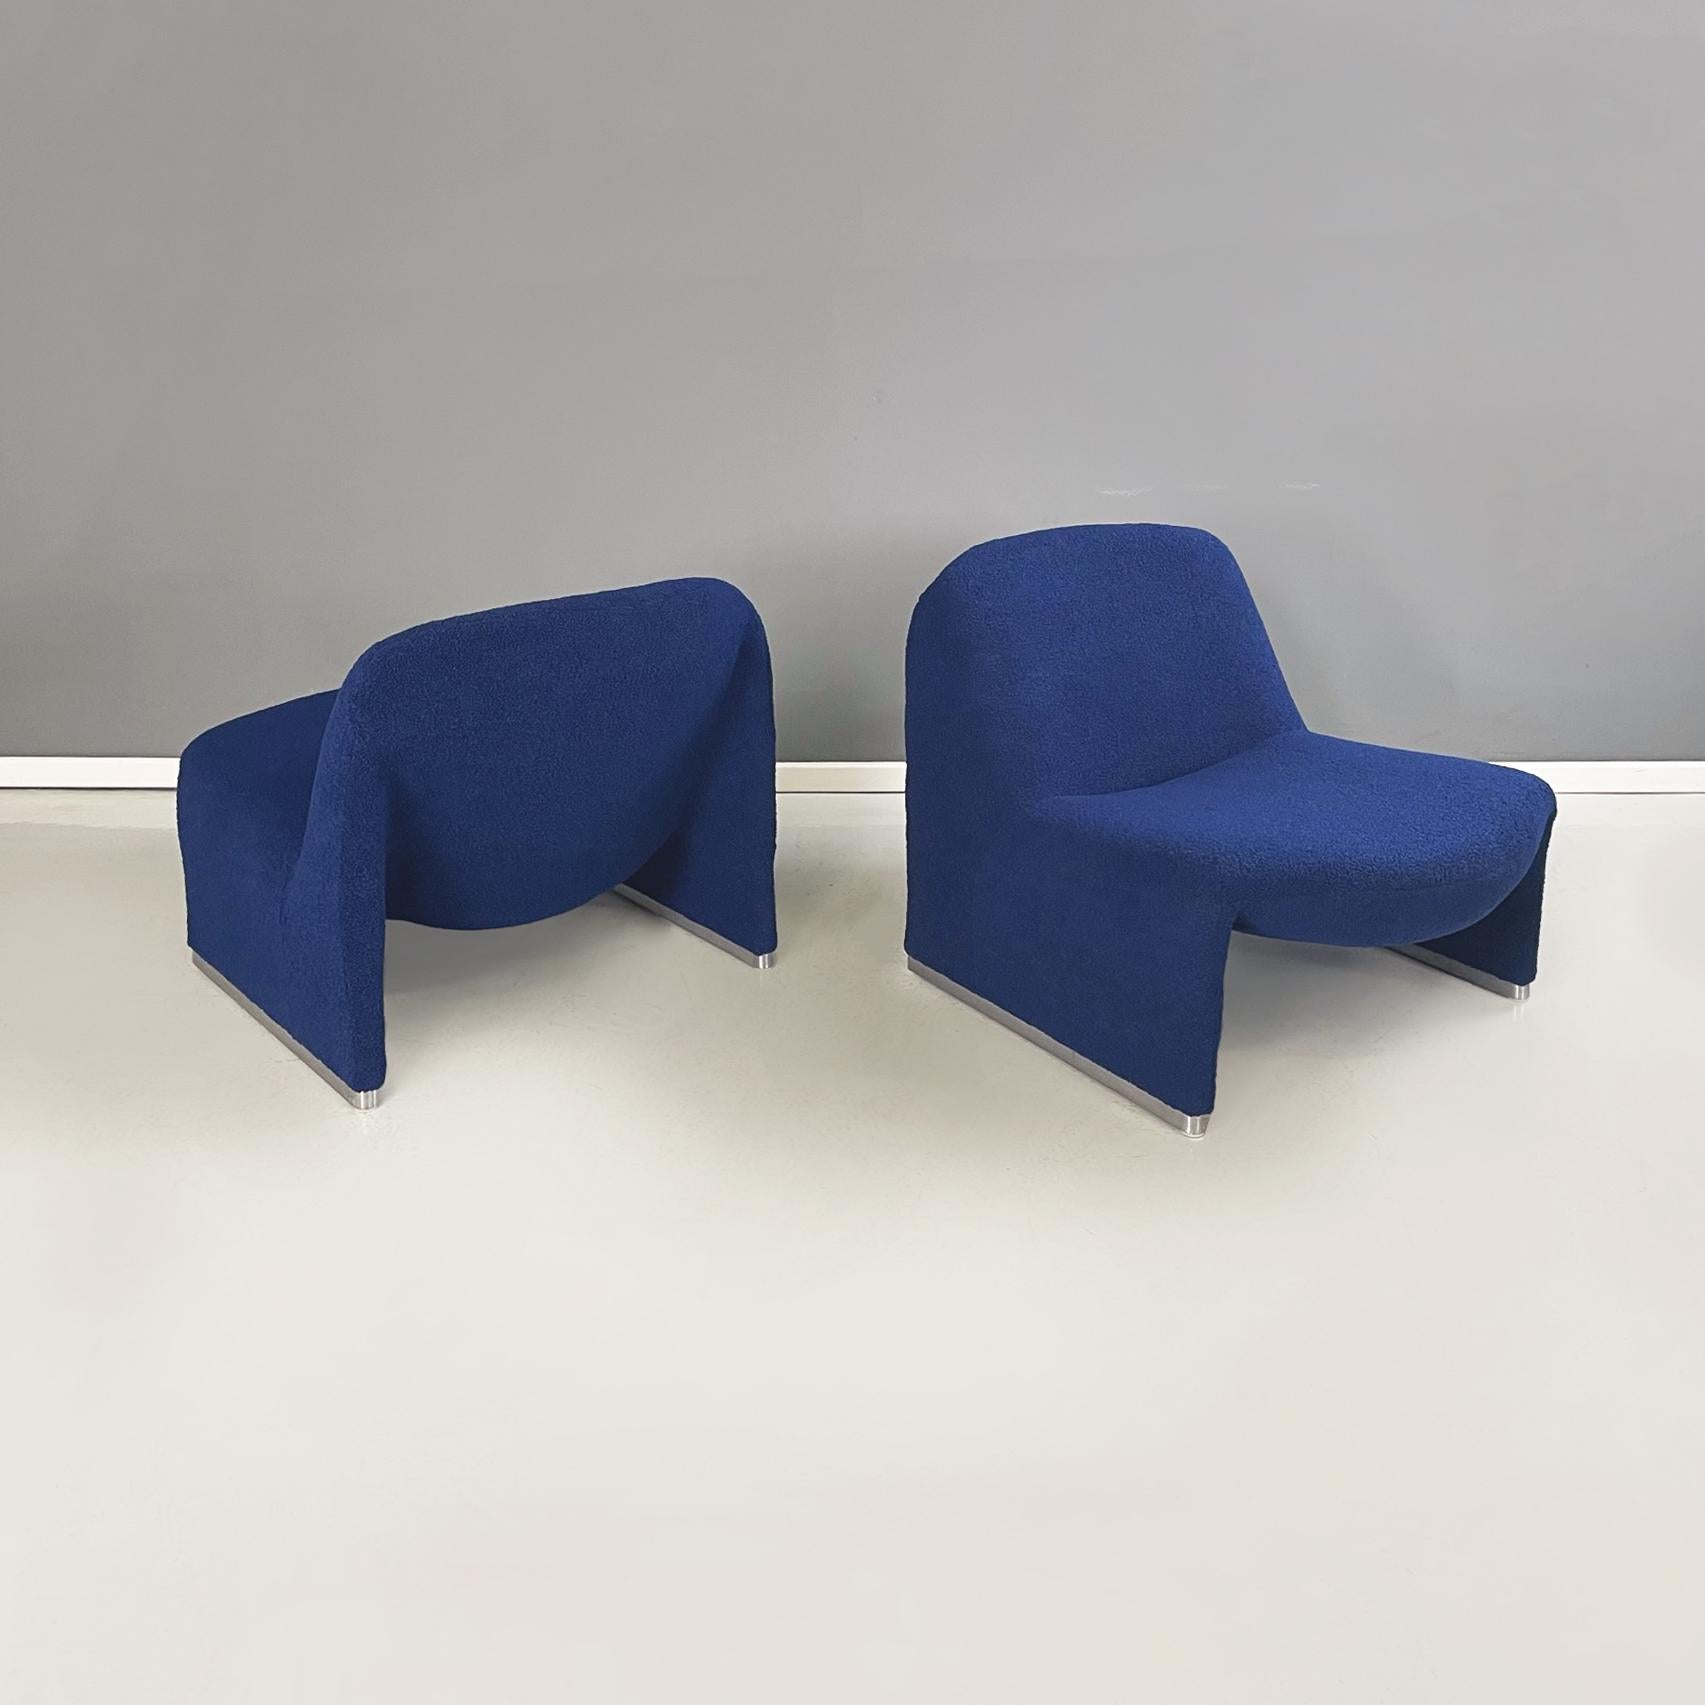 Italian modern Blue teddy fabric Armchairs Alky by Giancarlo Piretti for Anonima Castelli, 1970s
Pair of armchair mod. Alky in blue teddy fabric. The monocoque structure is provided on both sides with satin aluminum feet.
Produced by Anonima